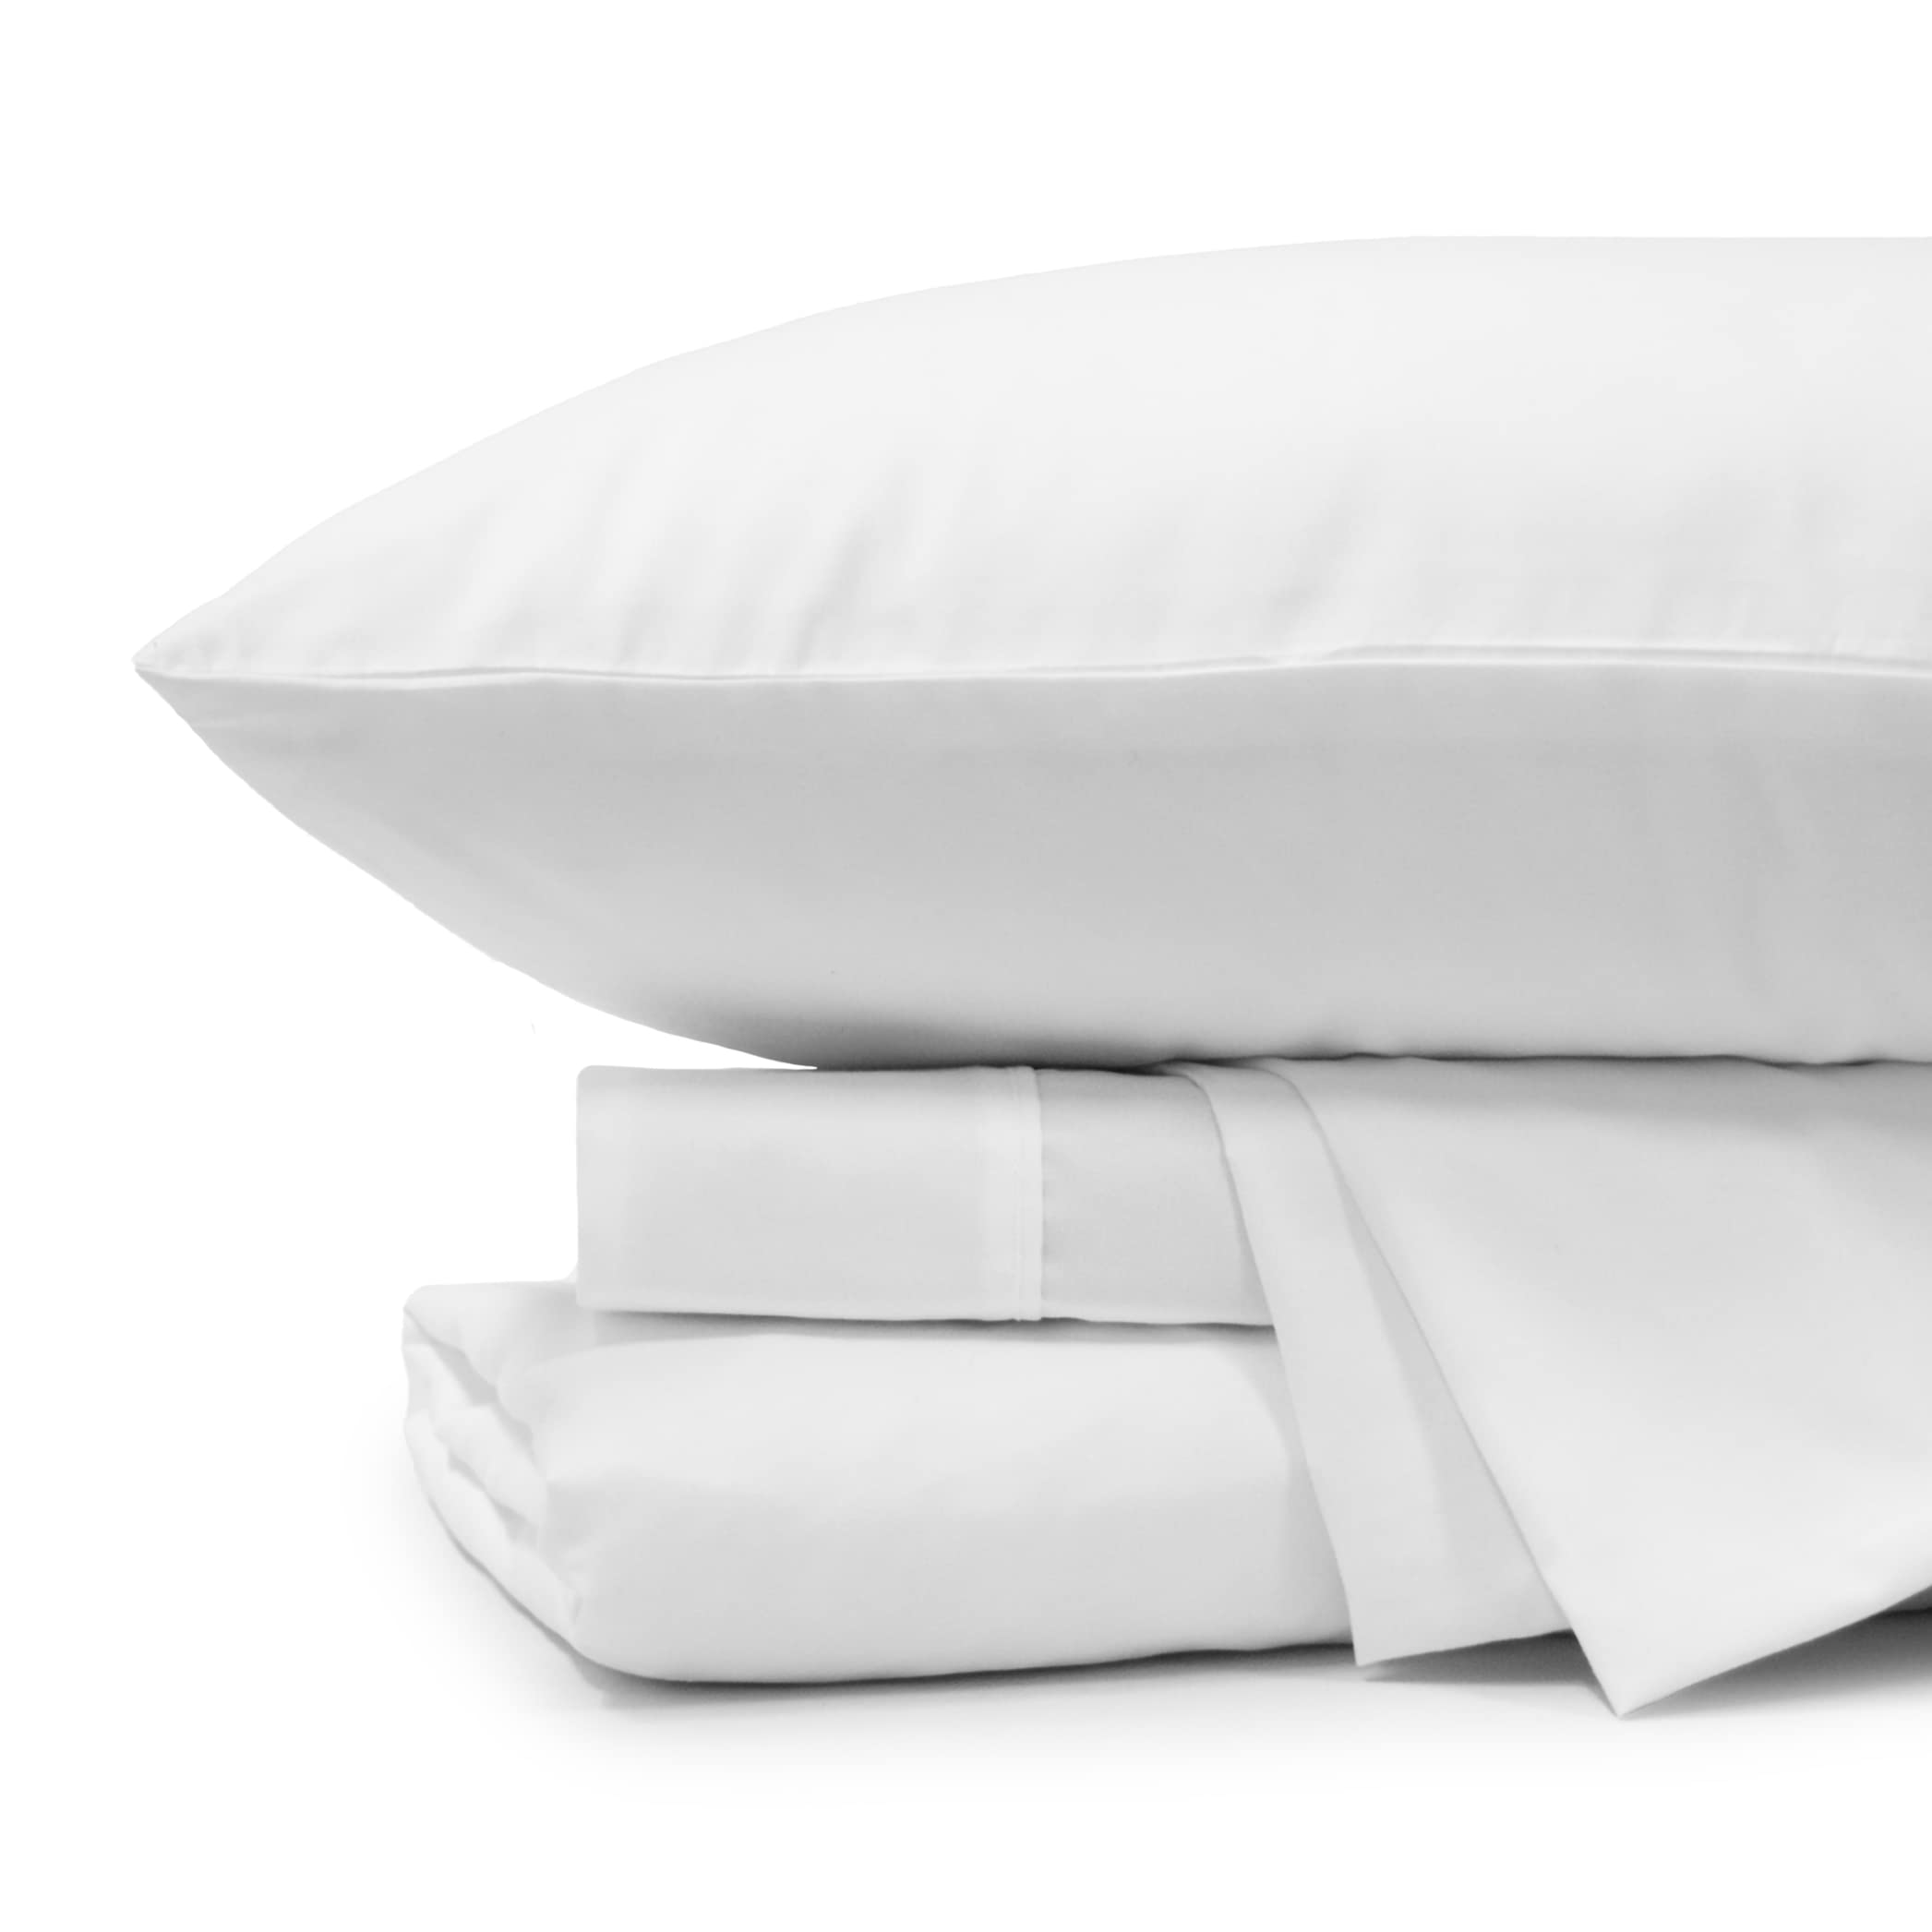 Jennifer Adams Essentials King Sheet Set - 4 Piece Microfiber Sheets & Pillowcases - Wrinkle-Resistant - Breathable - Deep Pockets up to 16” (White...